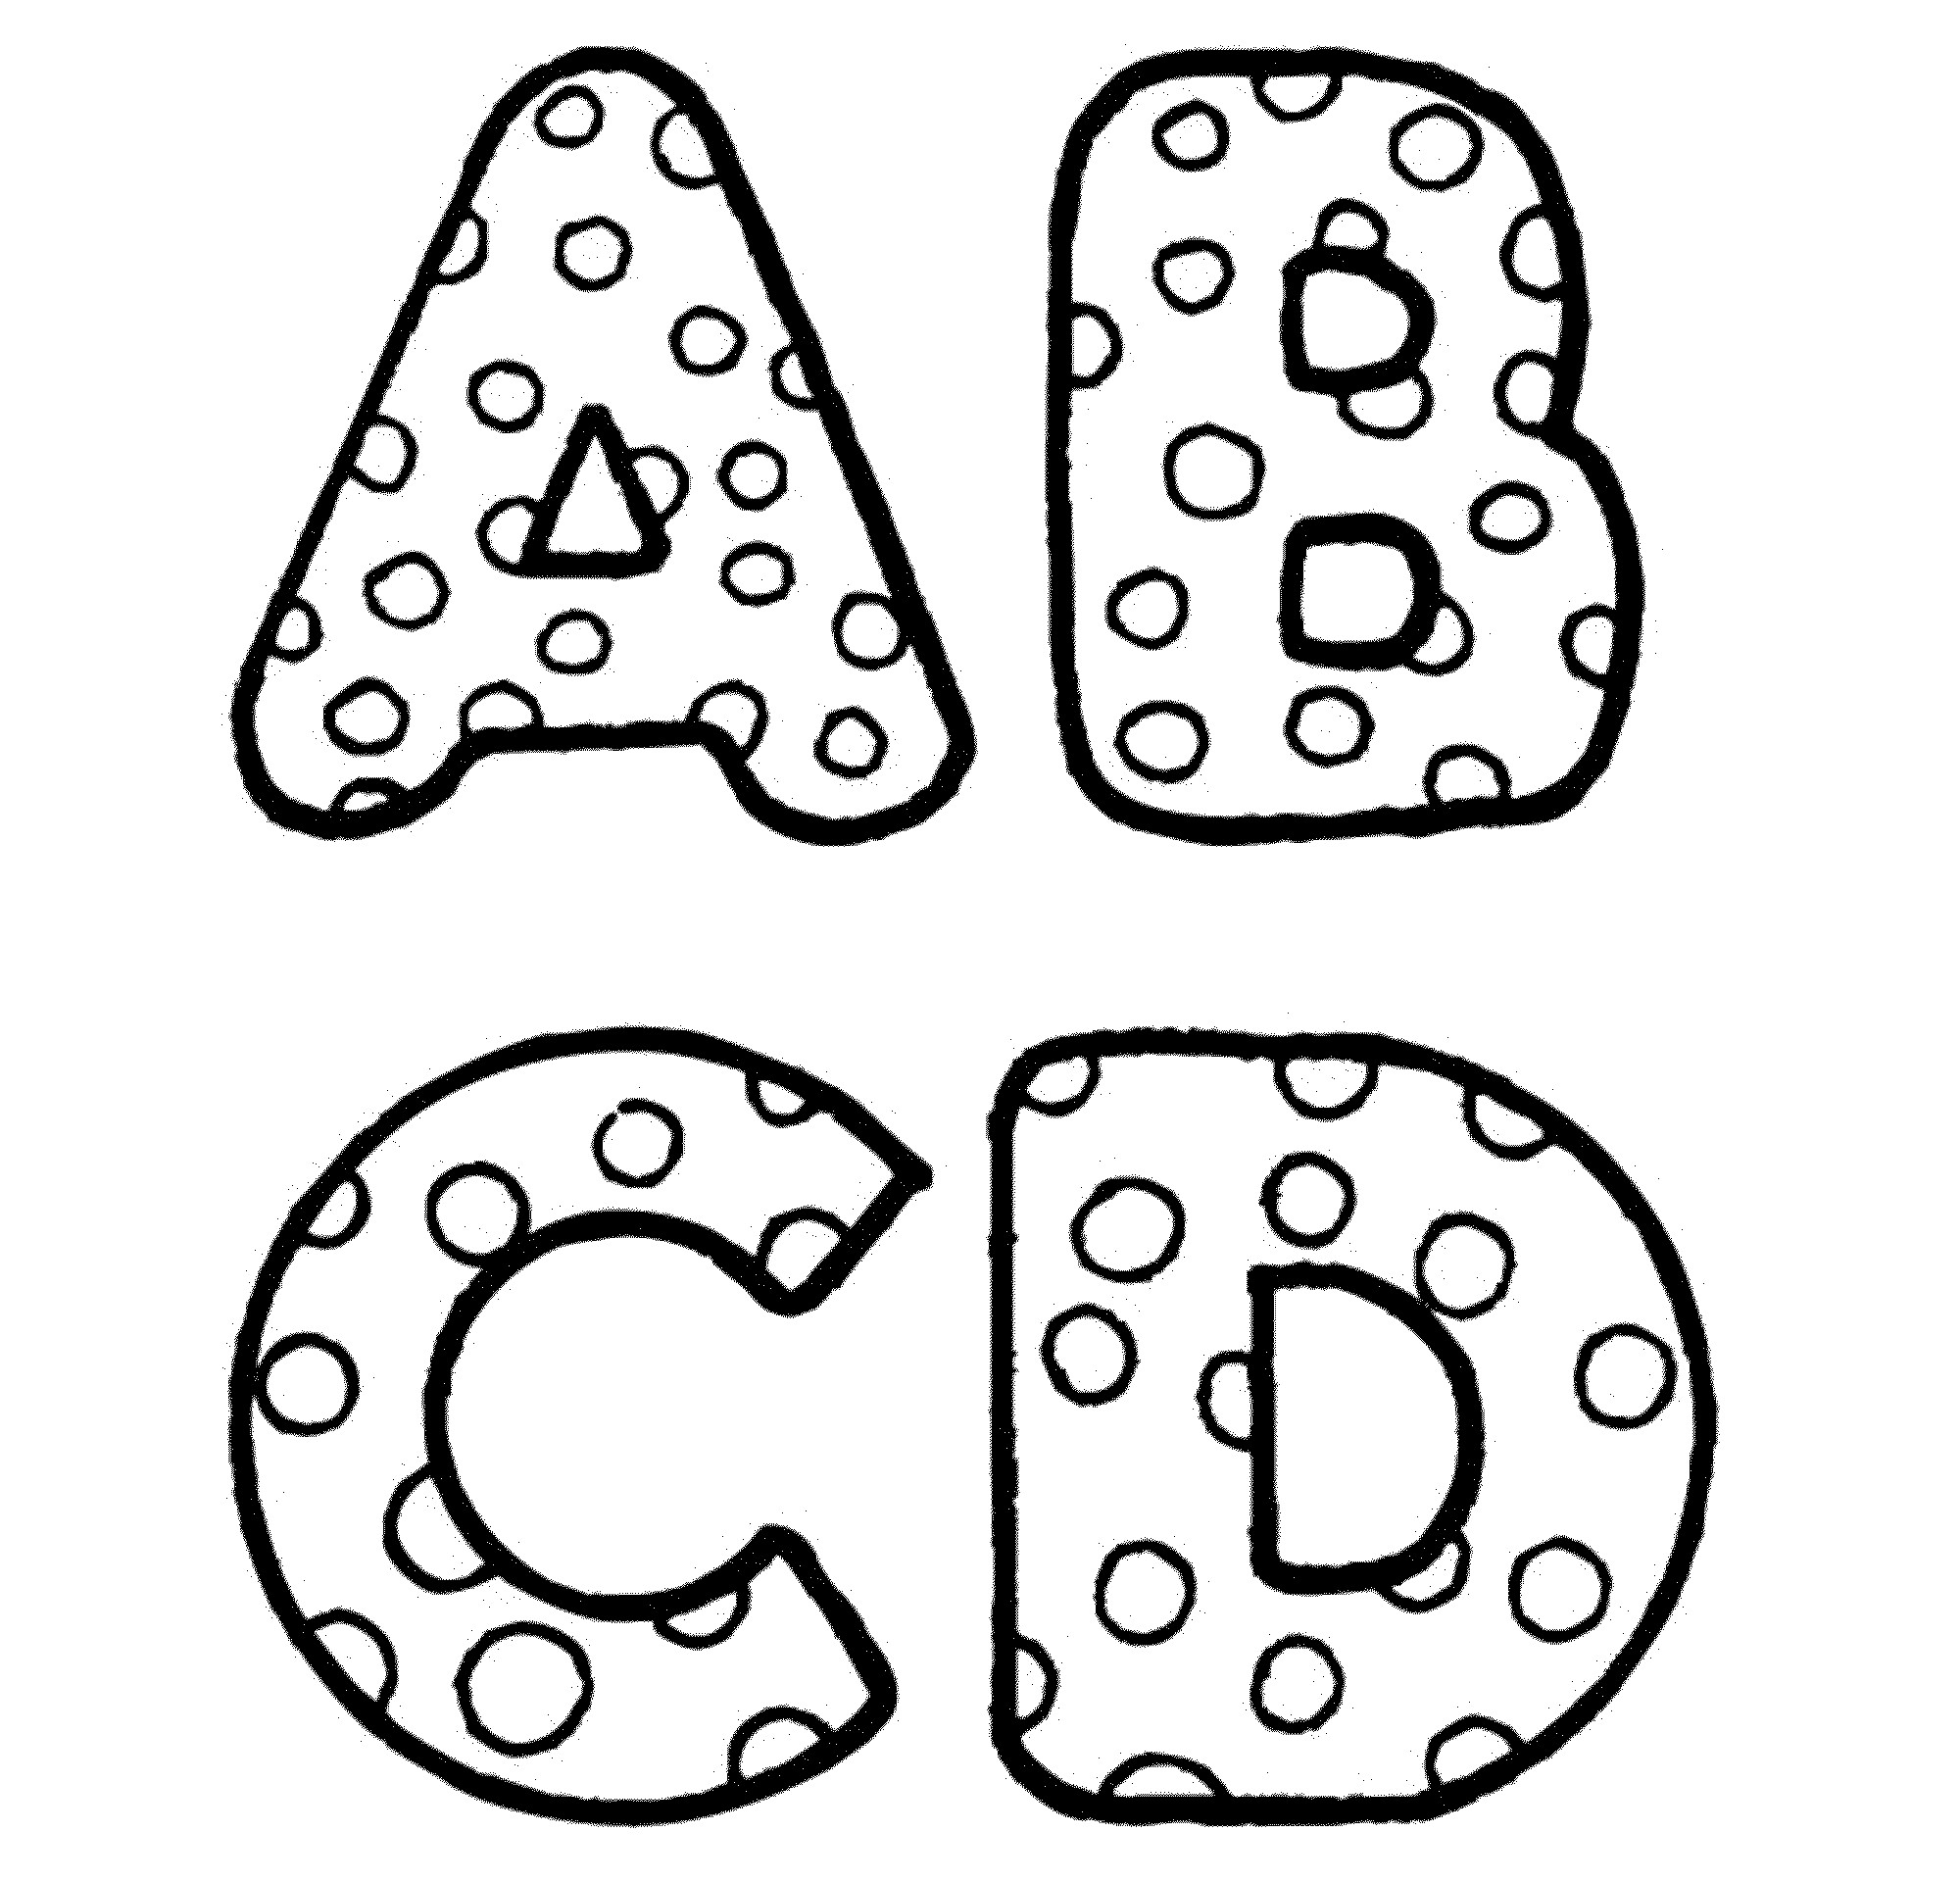 Coloring Sheets For Girls Abc Coloring Sheets
 Alphabet Coloring Pages For Preschool Page Image Clipart